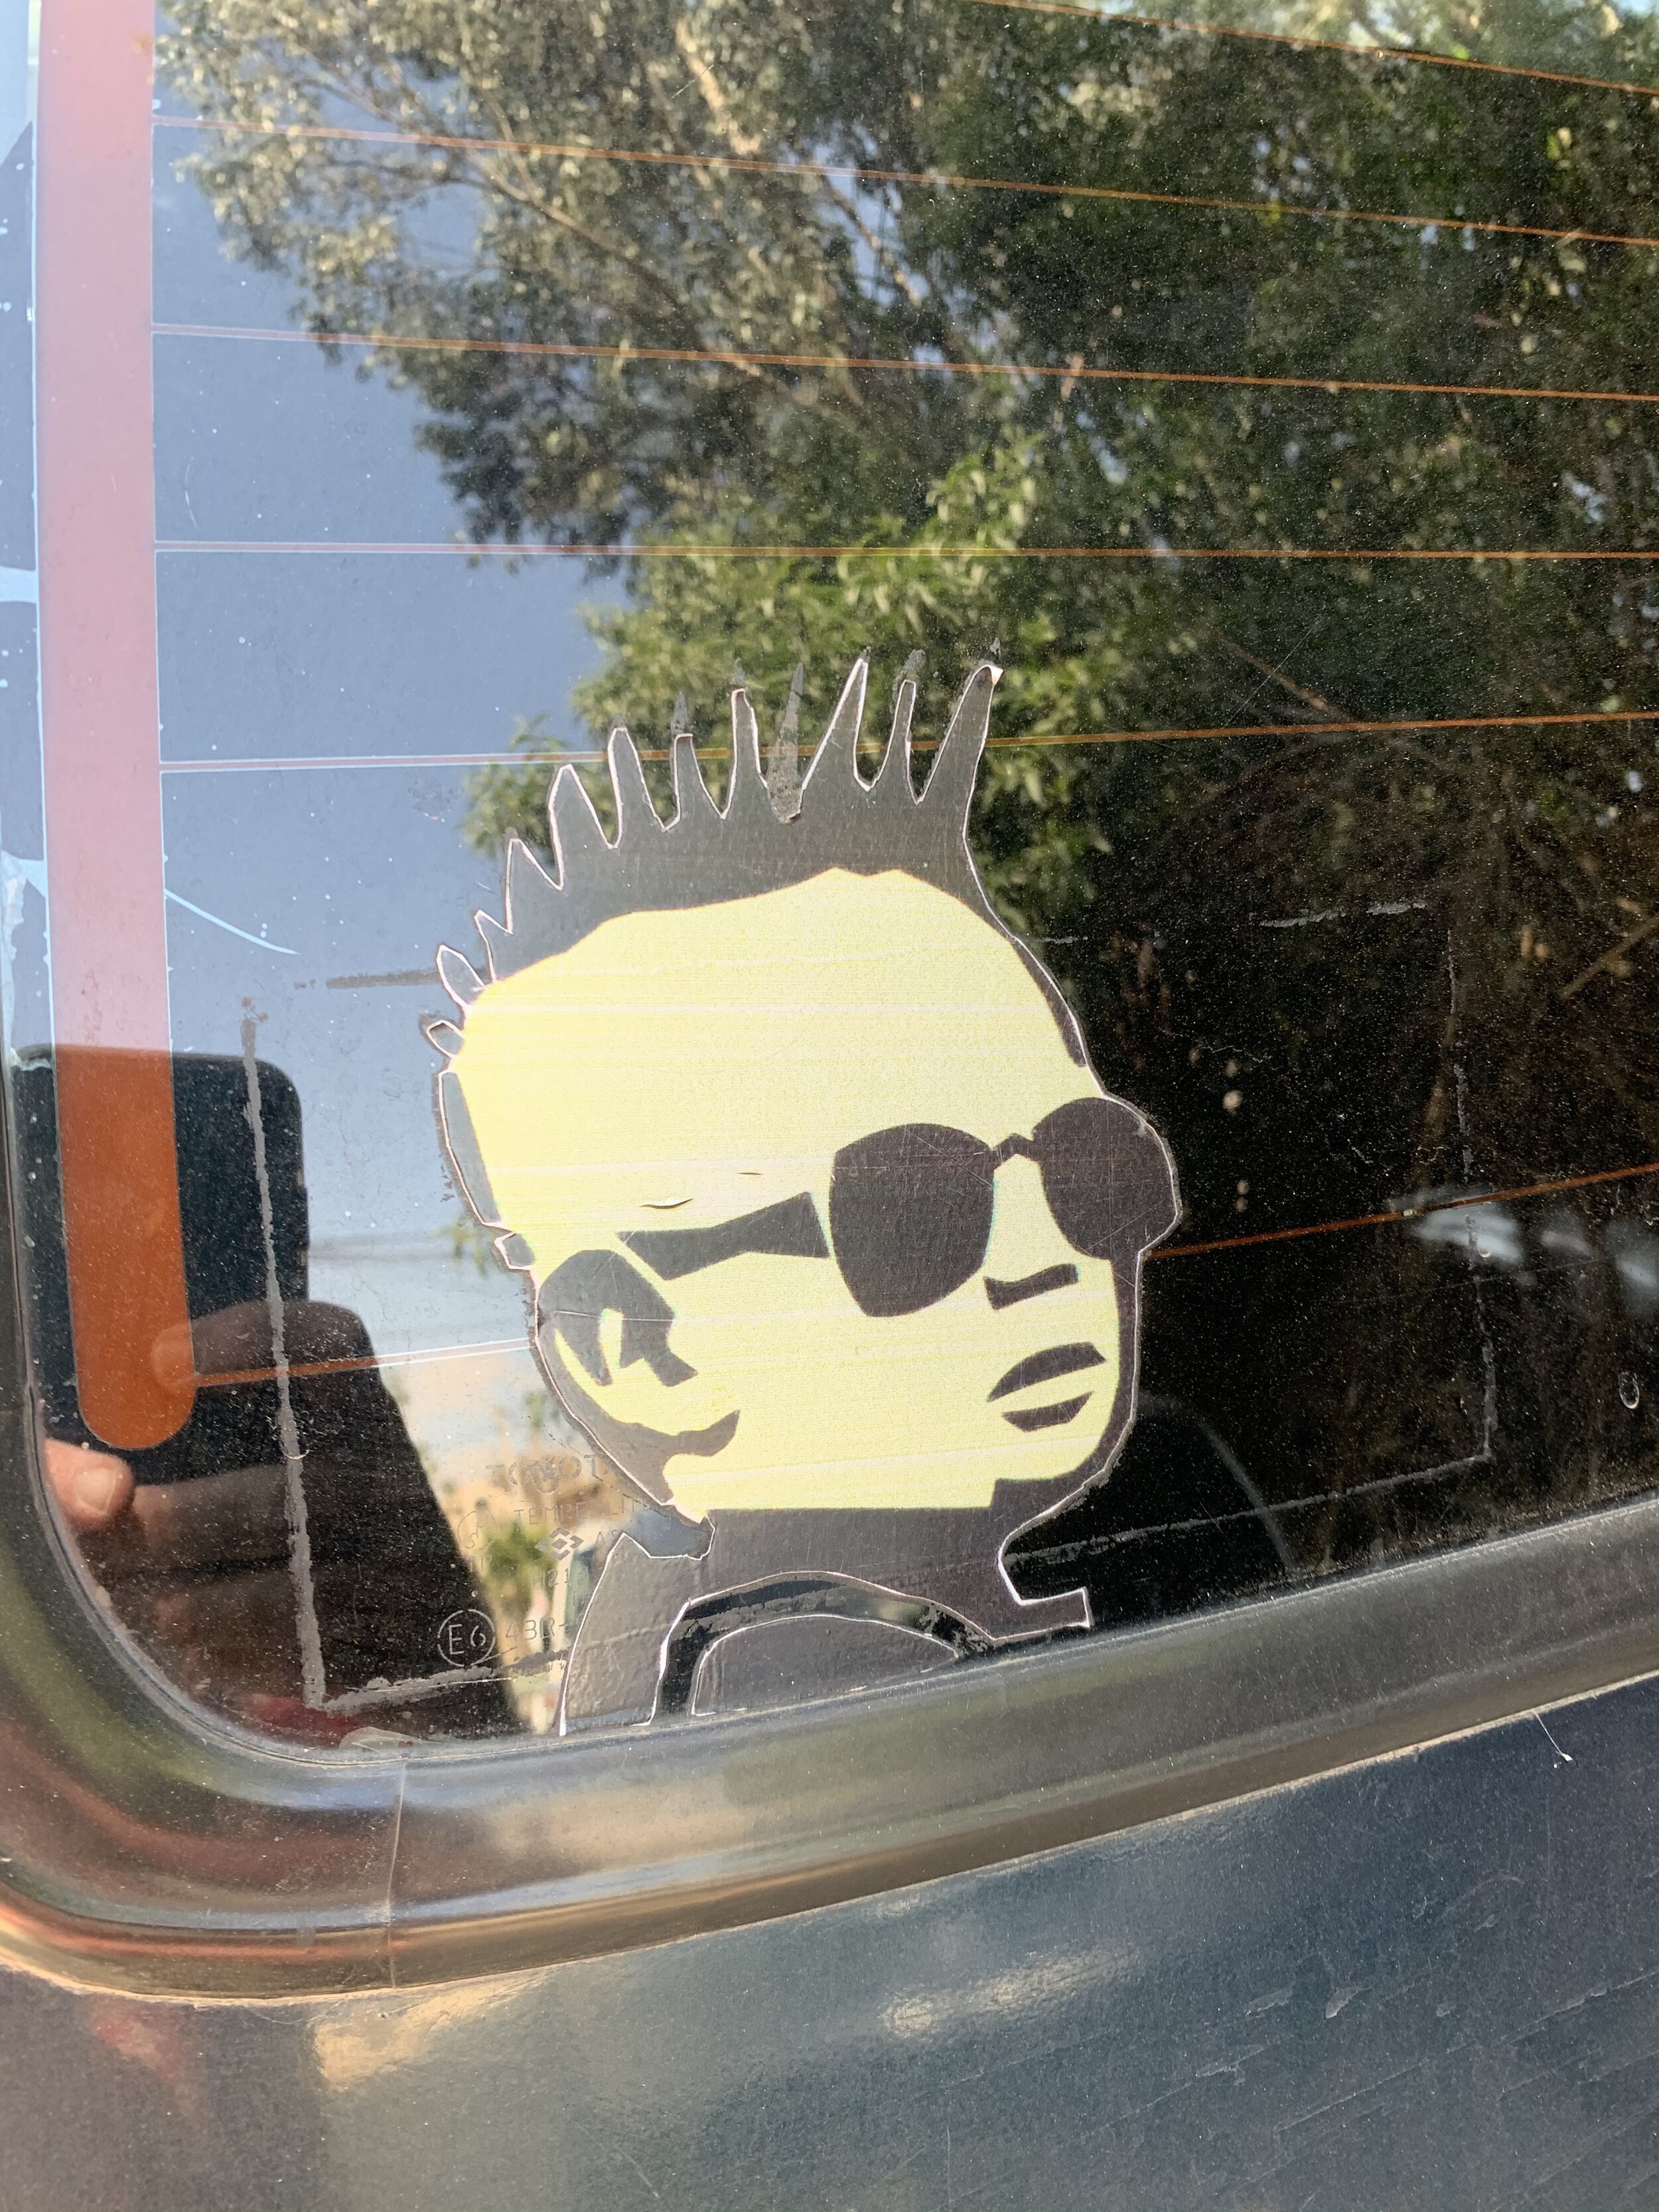 These punk kid stickers are everywhere. And no one knows why.